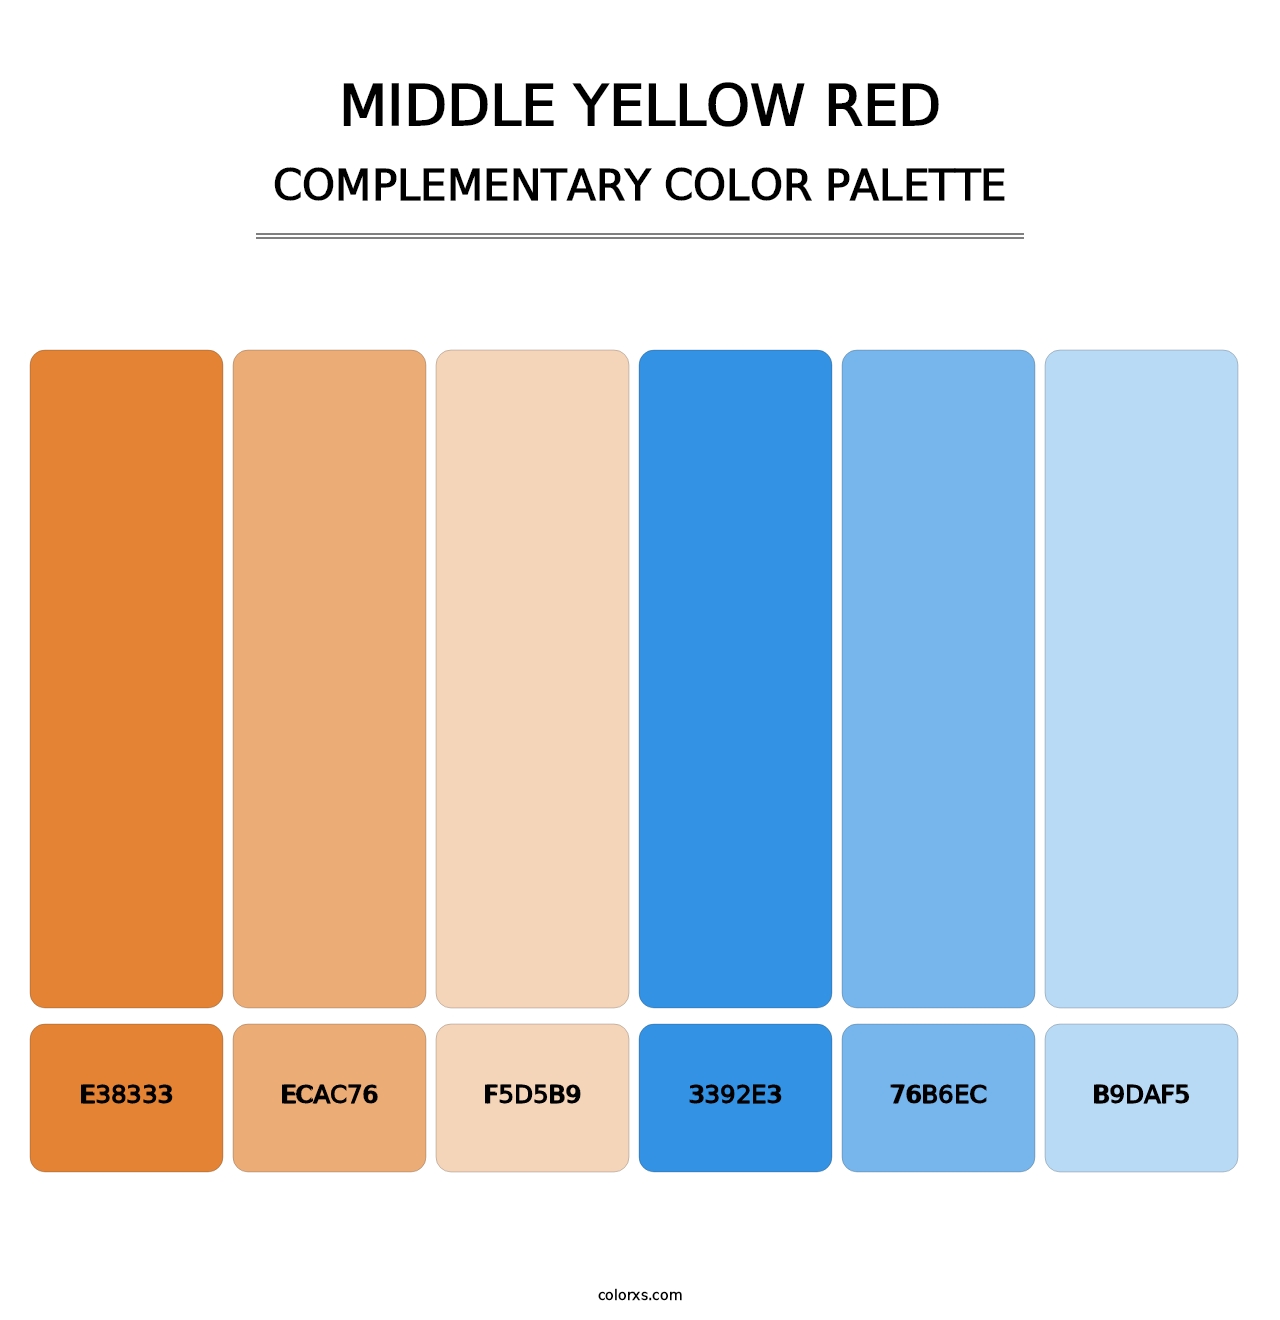 Middle Yellow Red - Complementary Color Palette